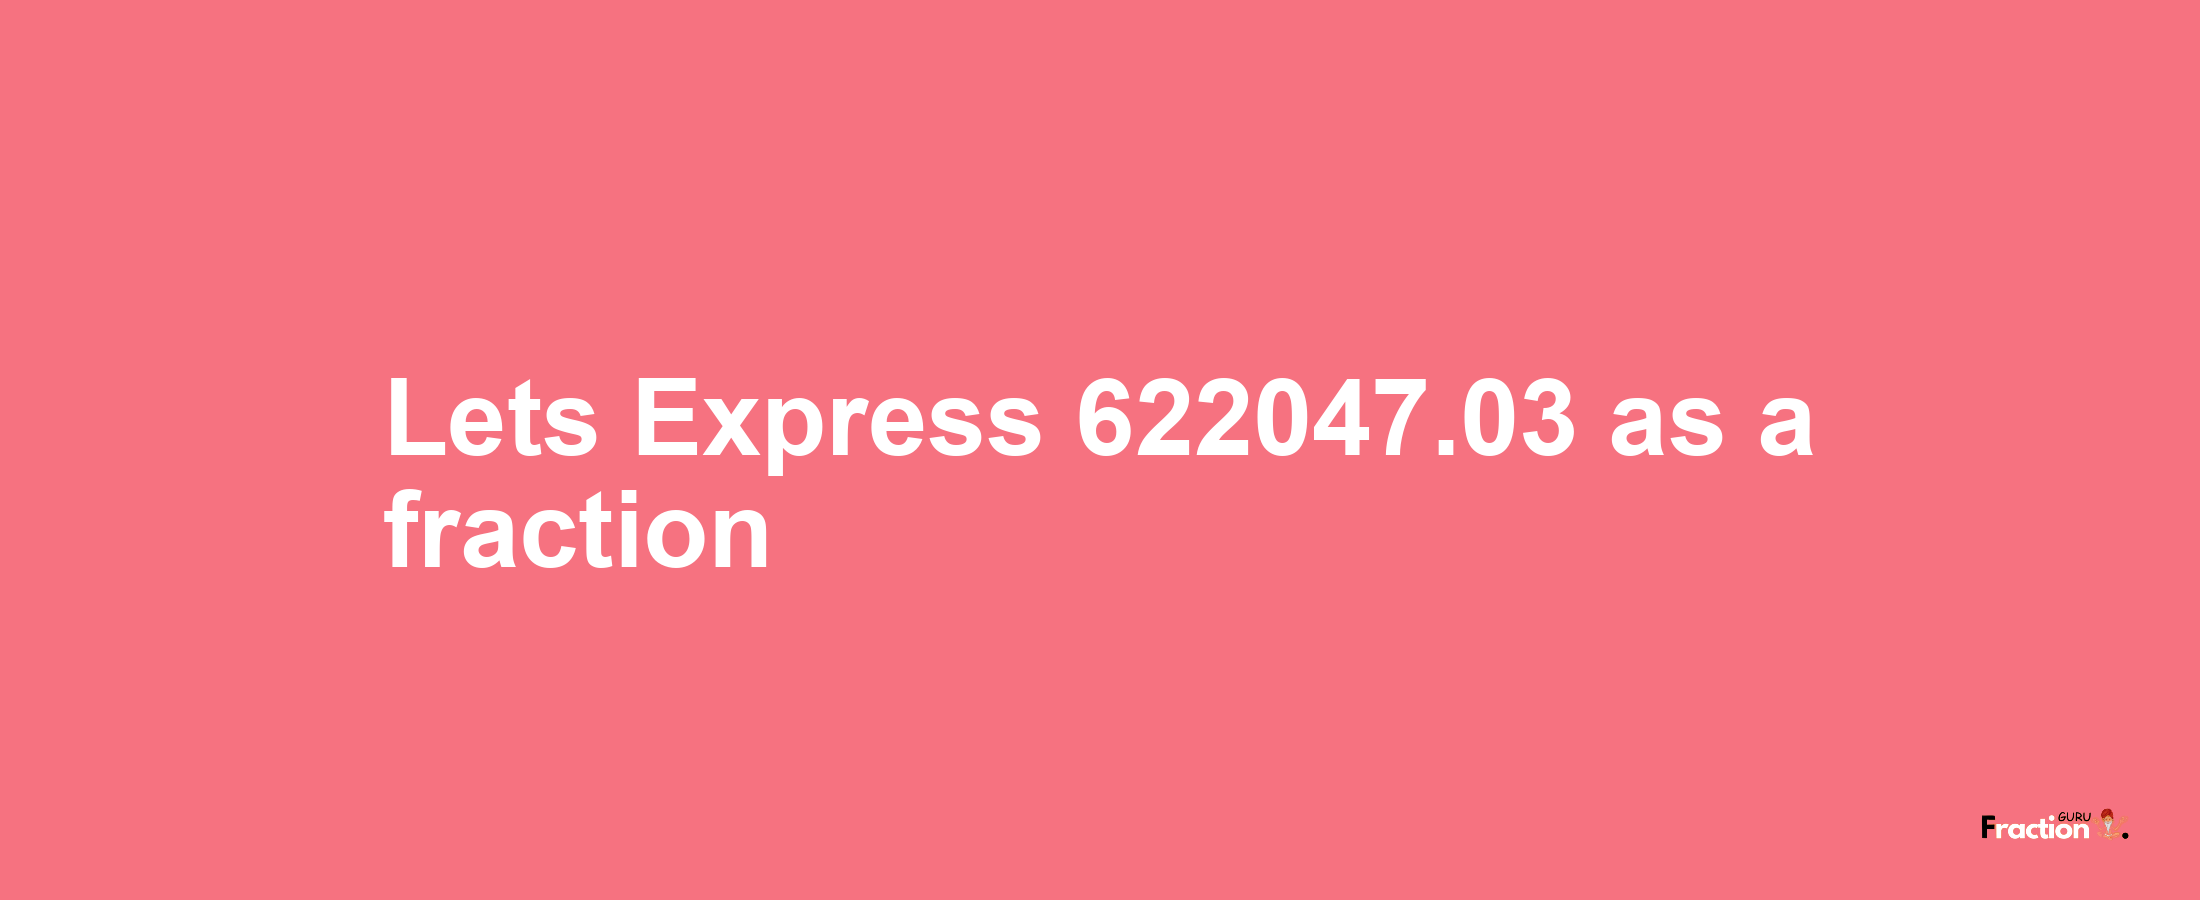 Lets Express 622047.03 as afraction